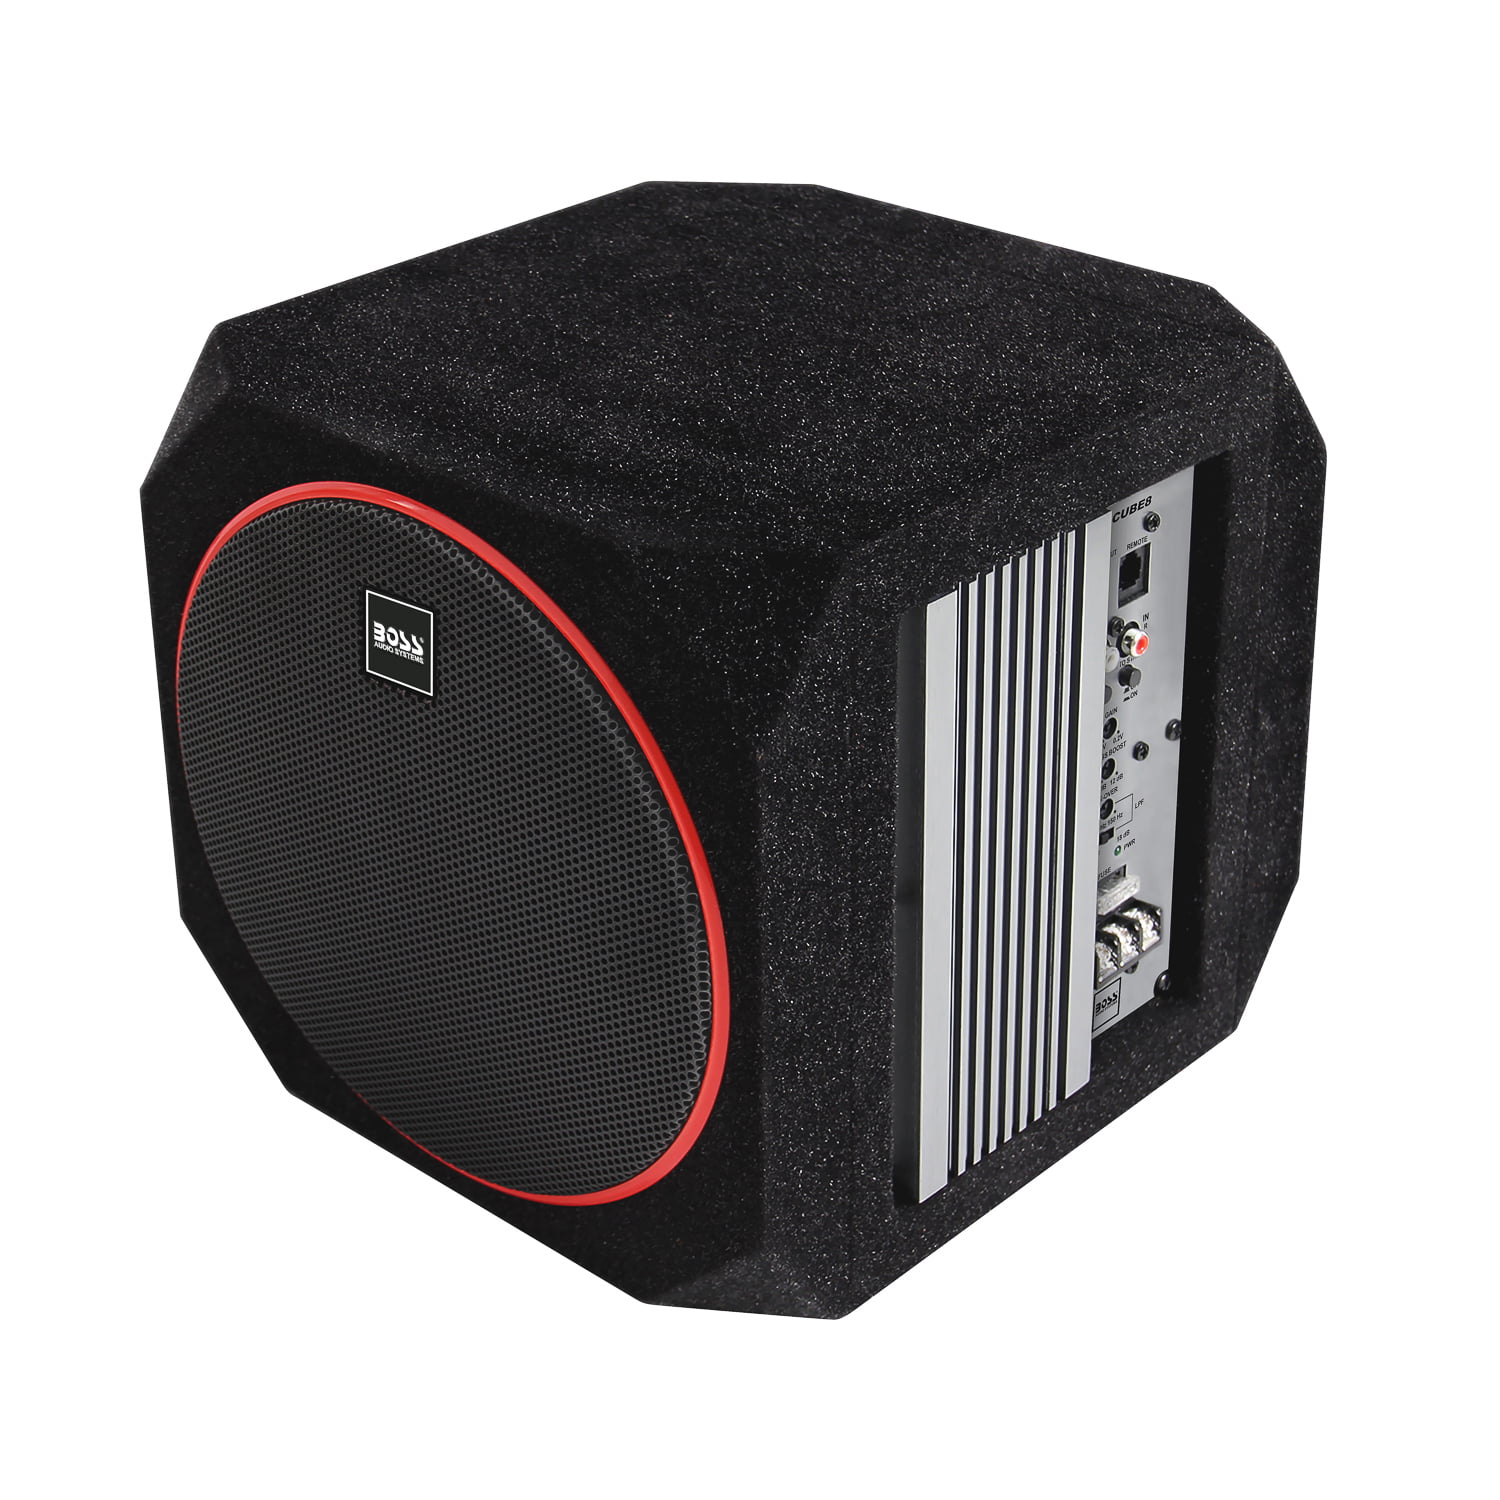 8 Inch Subwoofer and Amplifier Set by BOSS